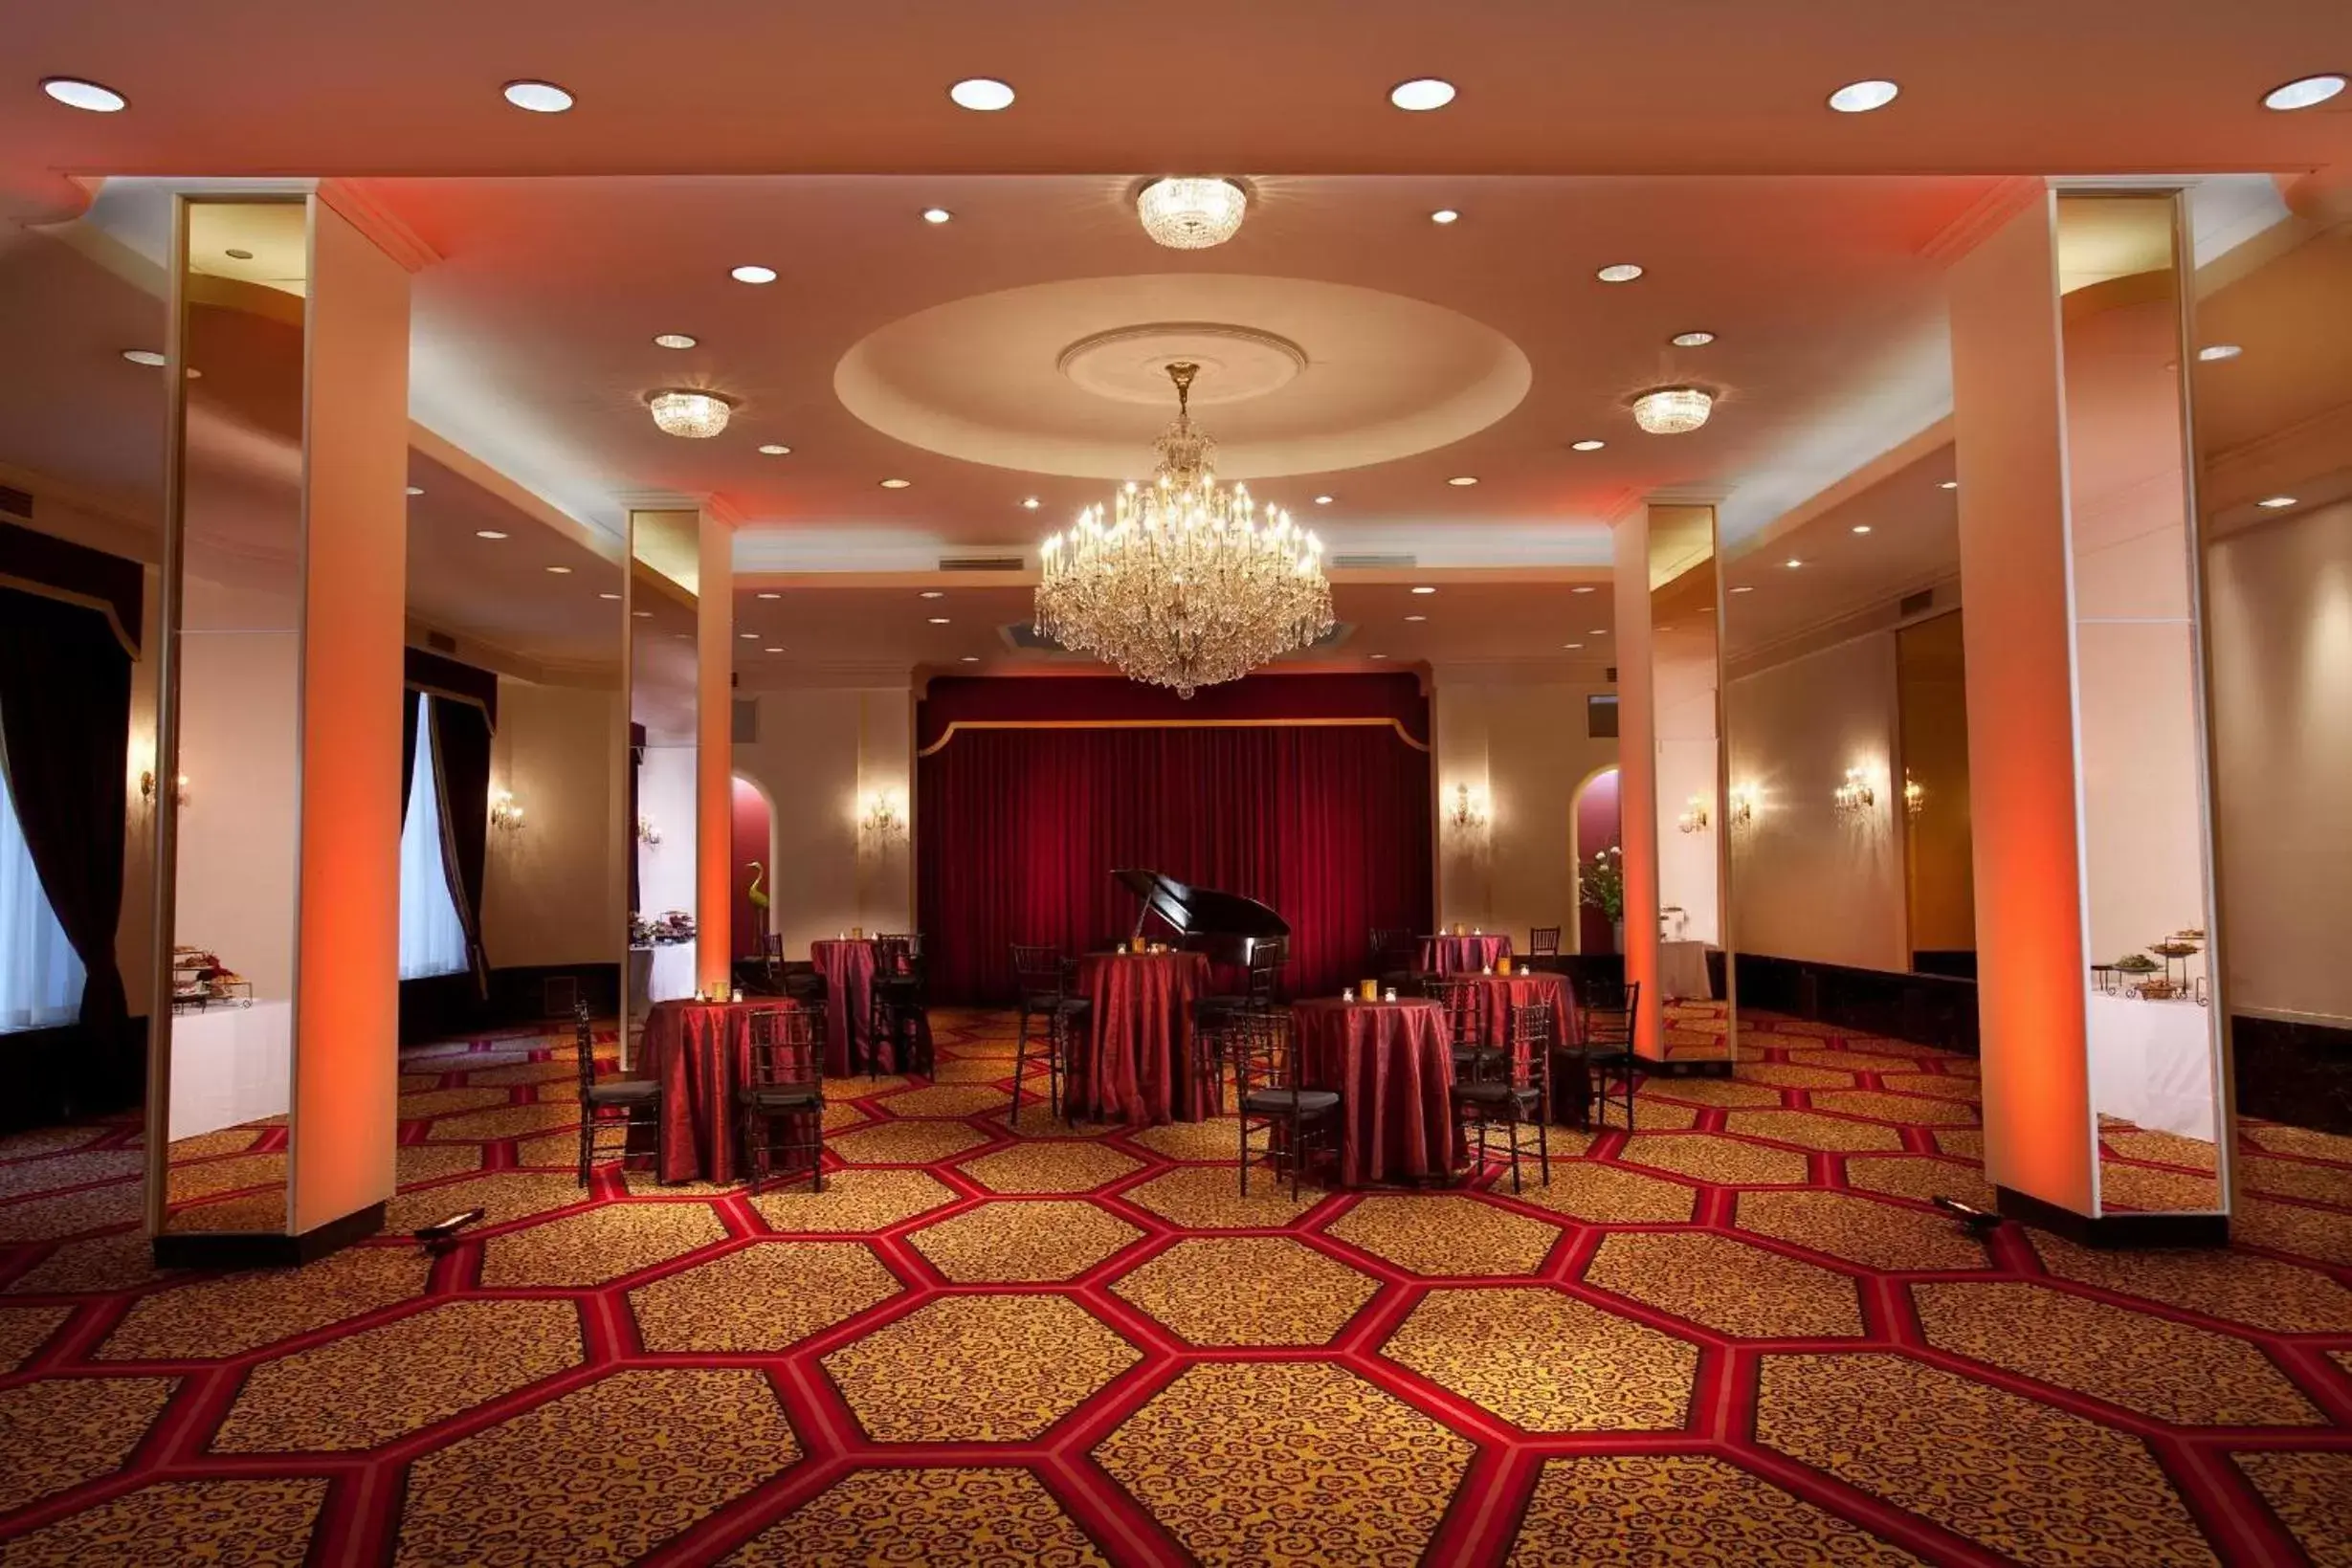 Banquet/Function facilities, Banquet Facilities in The New Yorker, A Wyndham Hotel